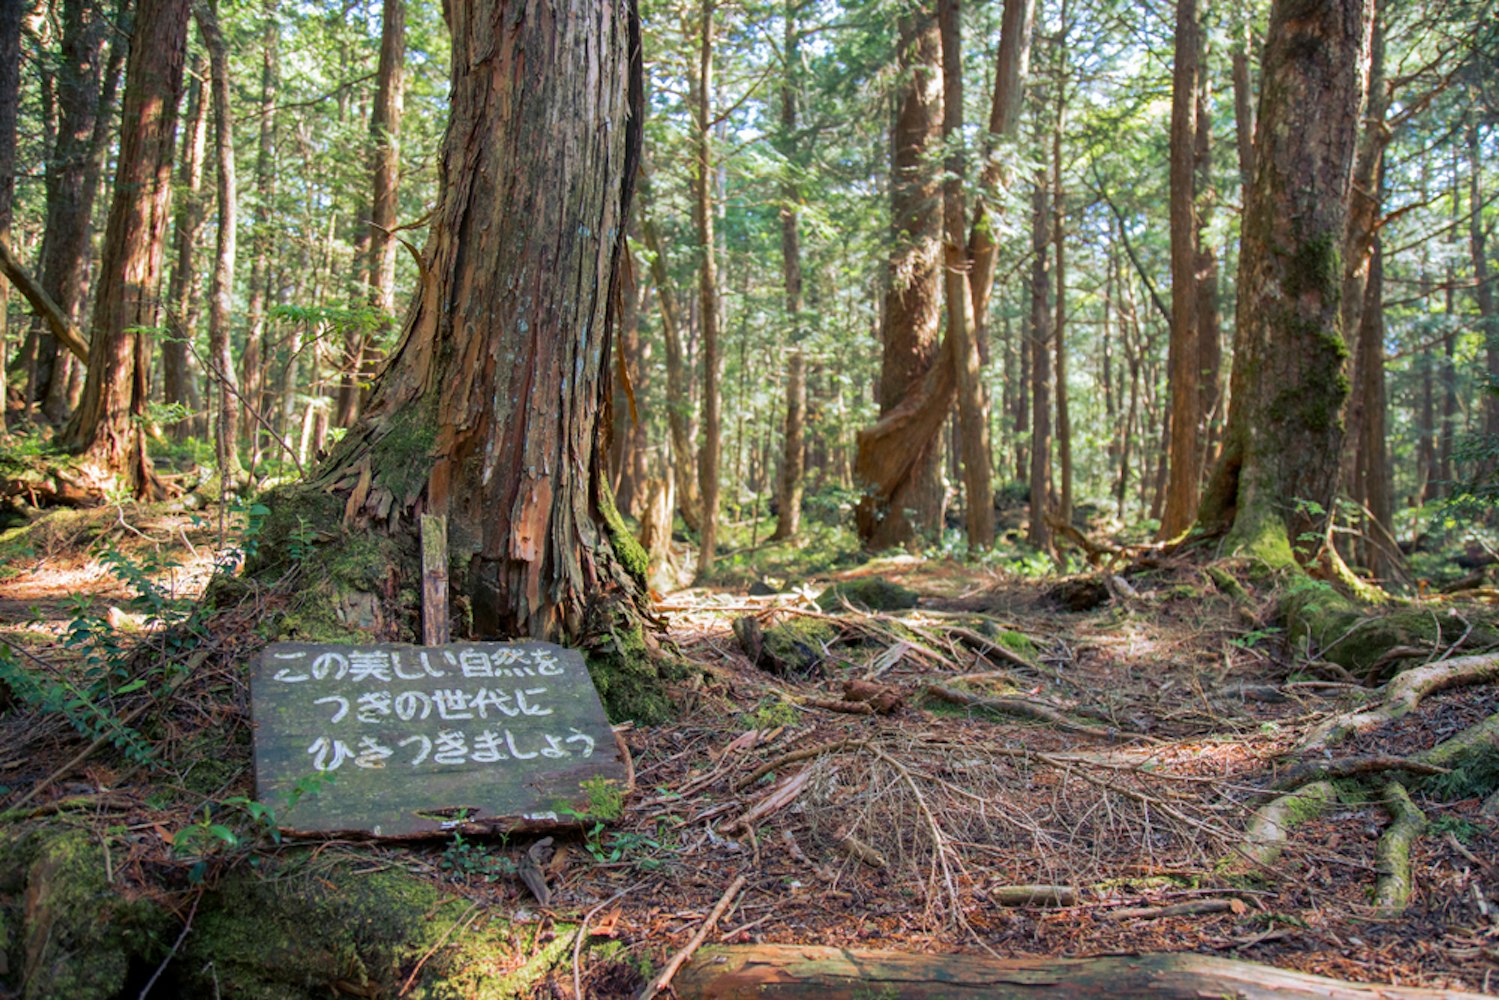 The Mysterious Aokigahara Forest